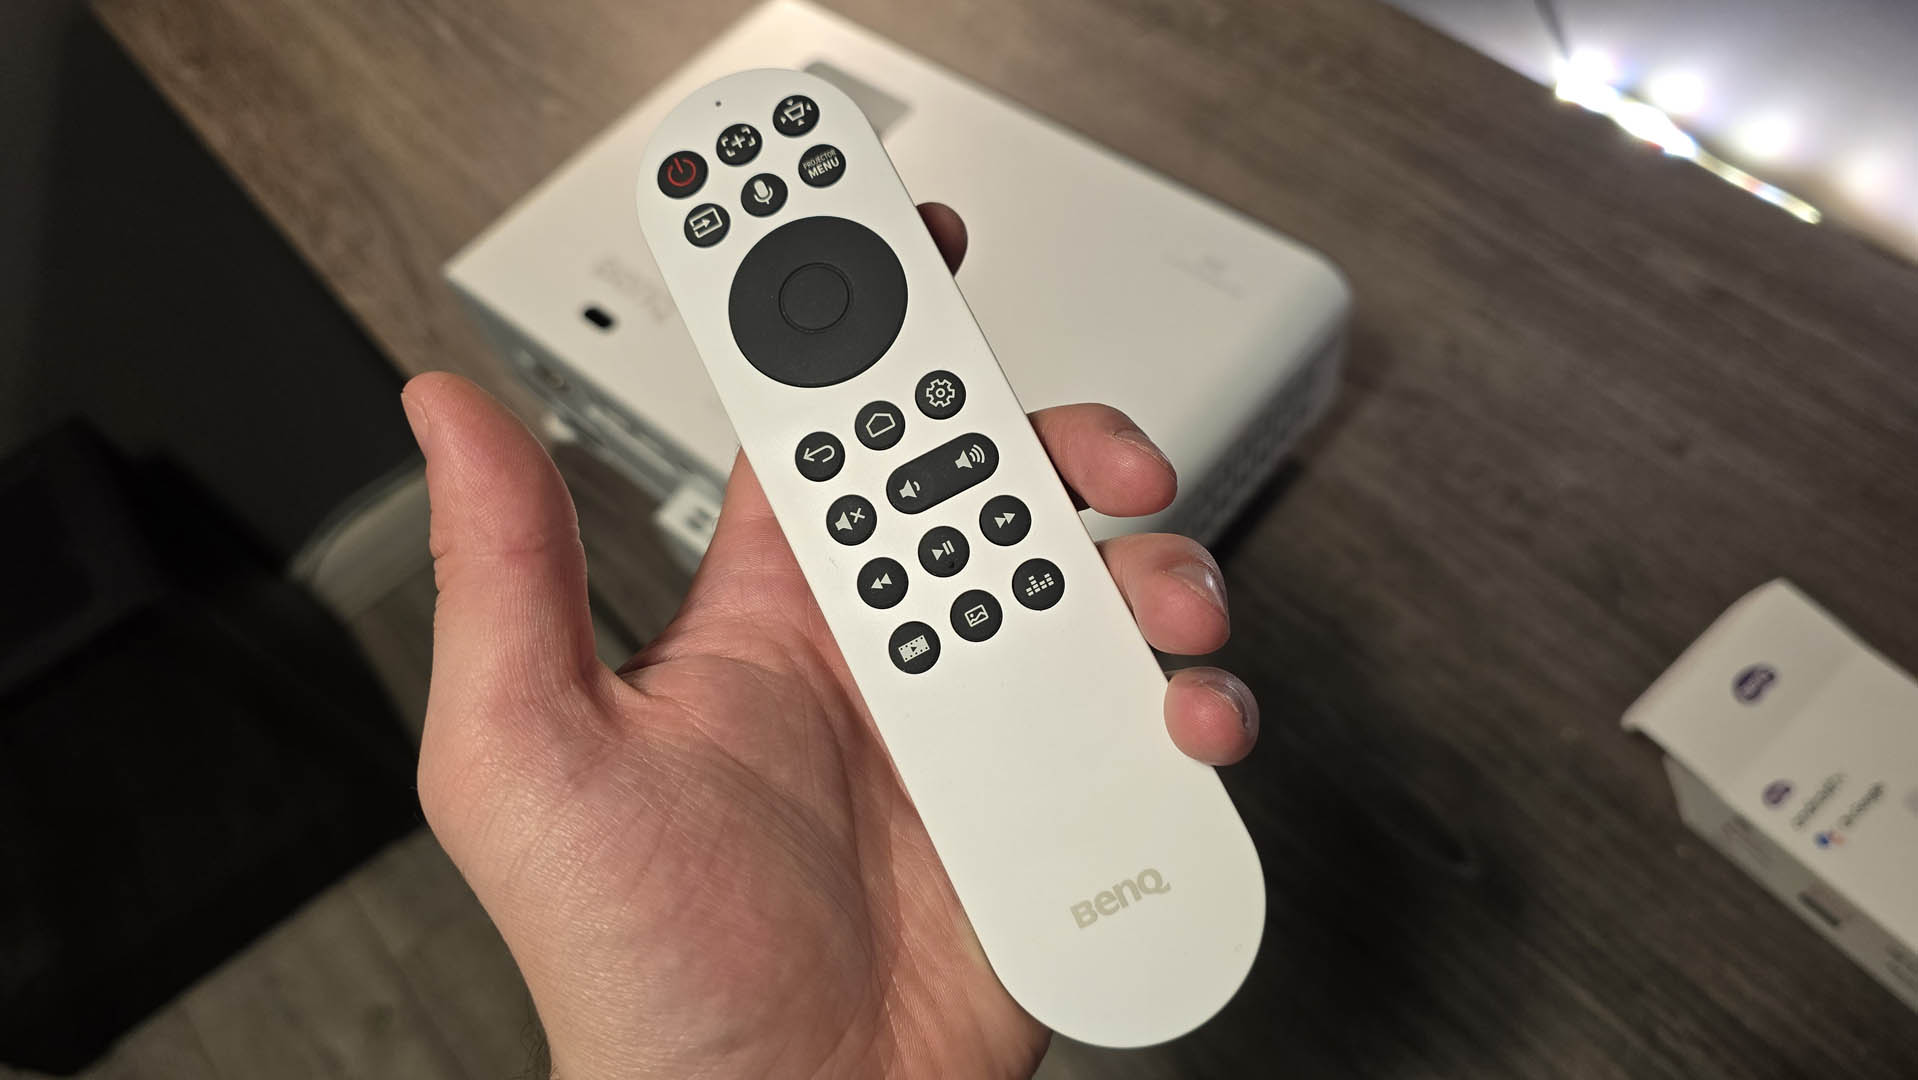 The remote control for the BenQ X500i gaming projector